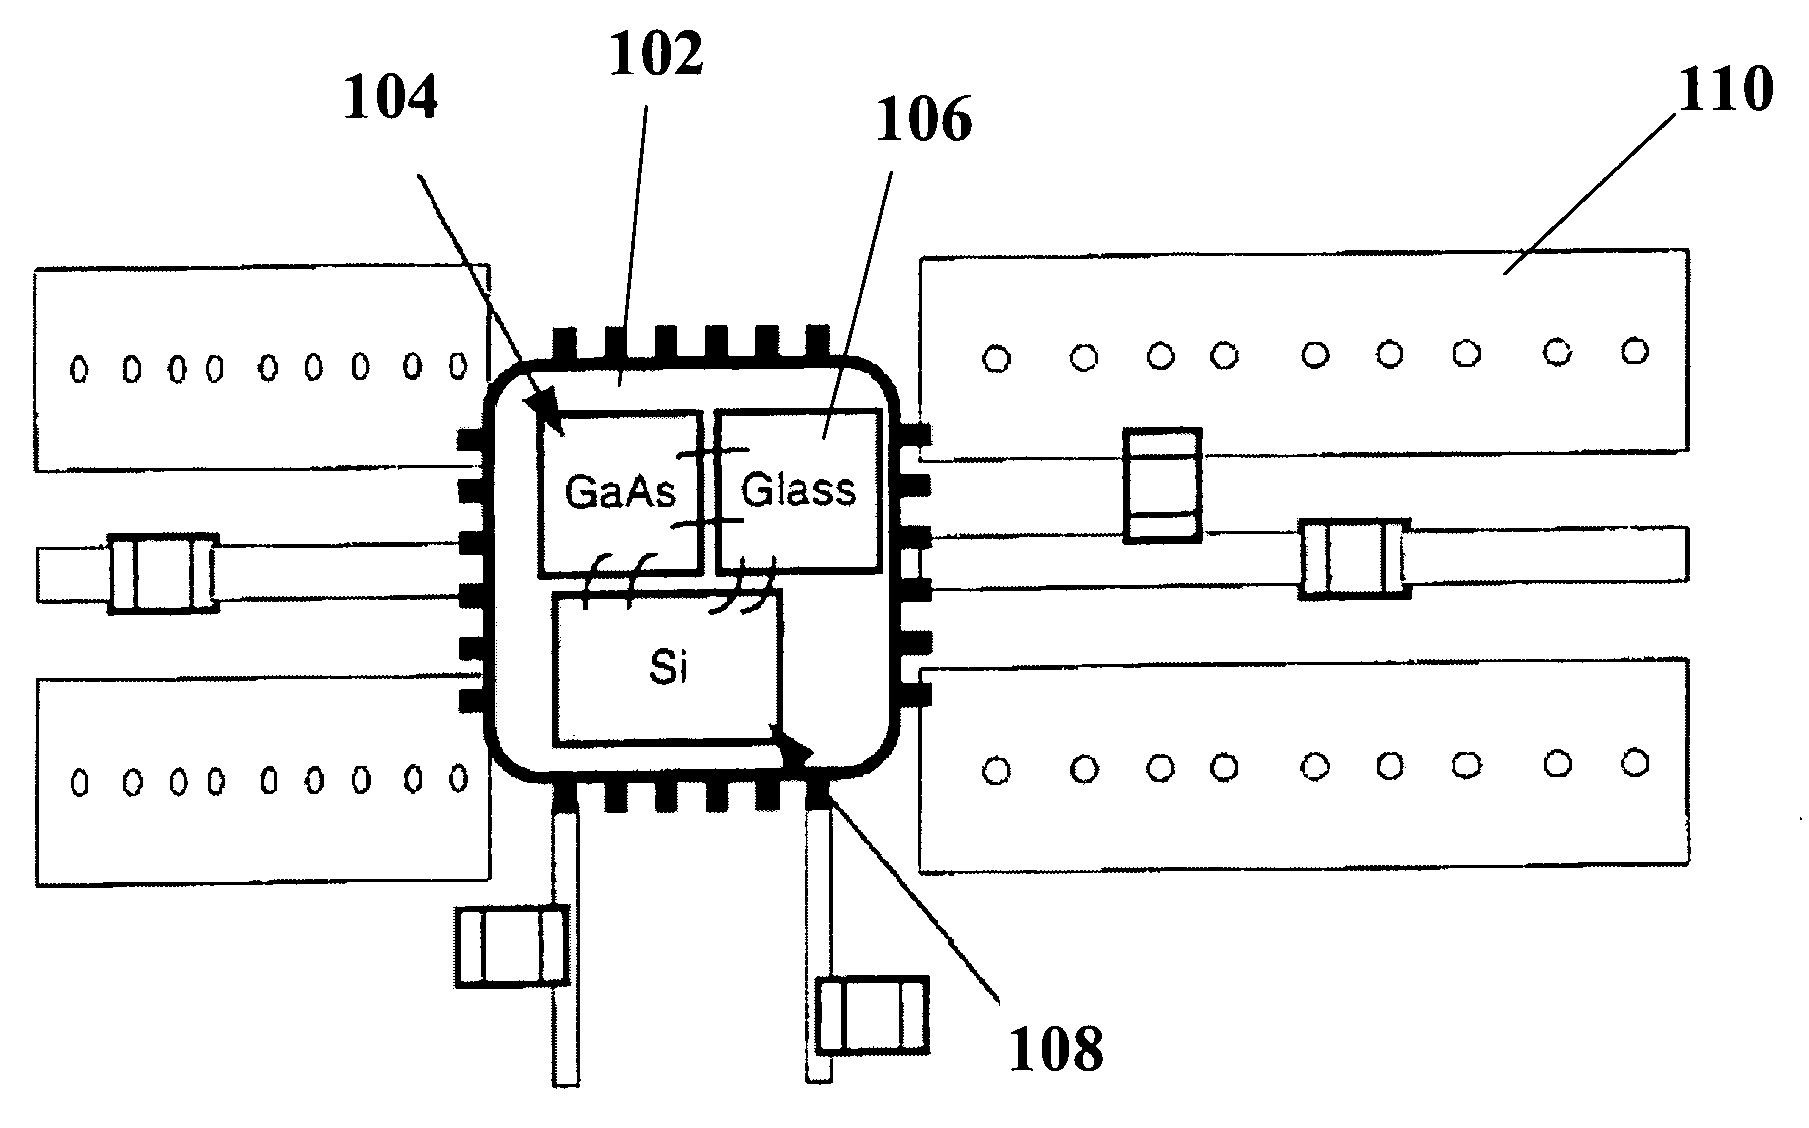 Apparatus, methods and articles of manufacture for a dual mode amplifier